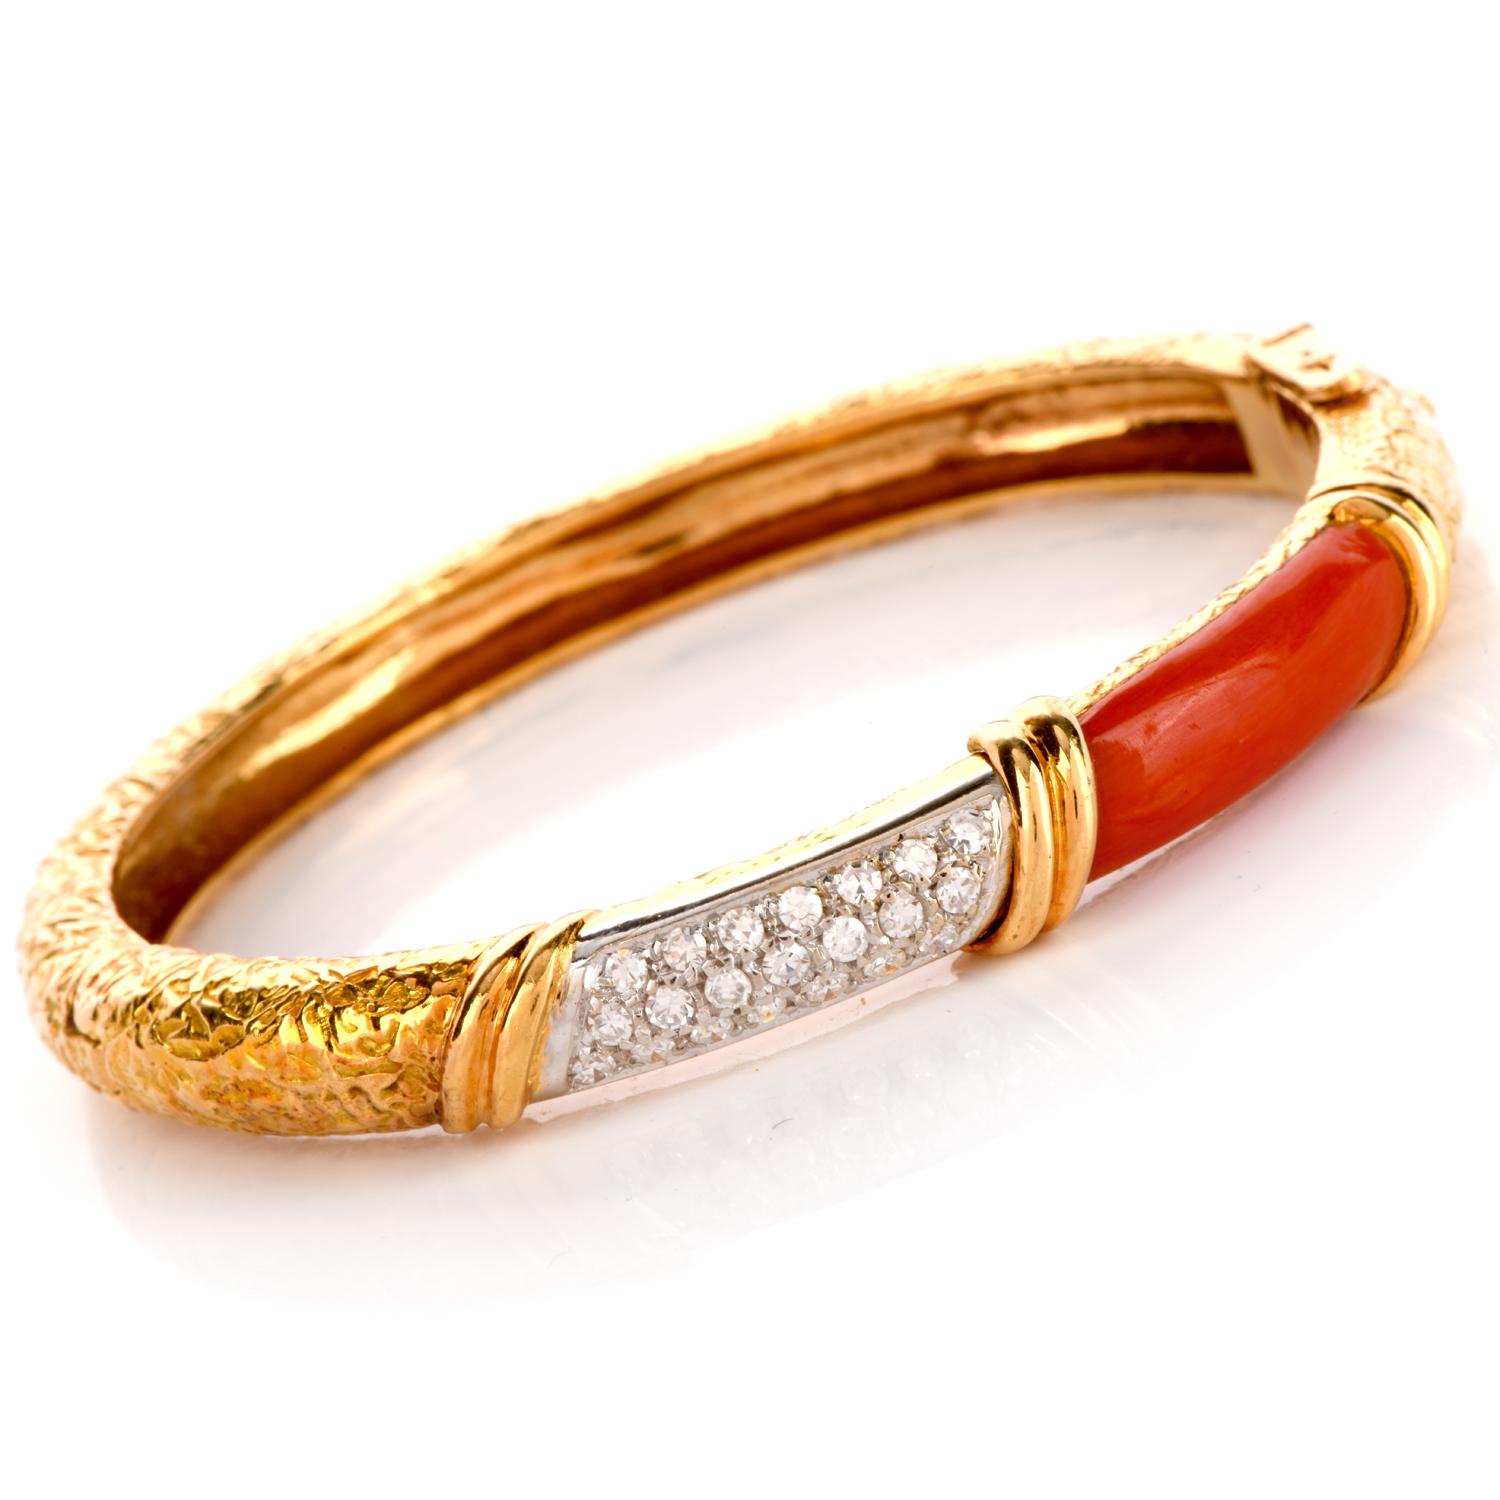 This Vintage 1970's bracelet created in 18k yellow gold,.

This chic bangle is very Feminine and set with 21 incredible round diamonds,

F-G  Color and VVS -VS Clarity and genuine Red Salmon Natural Coral.

Measurement: 7 inches x 7mm wide and 5 mm